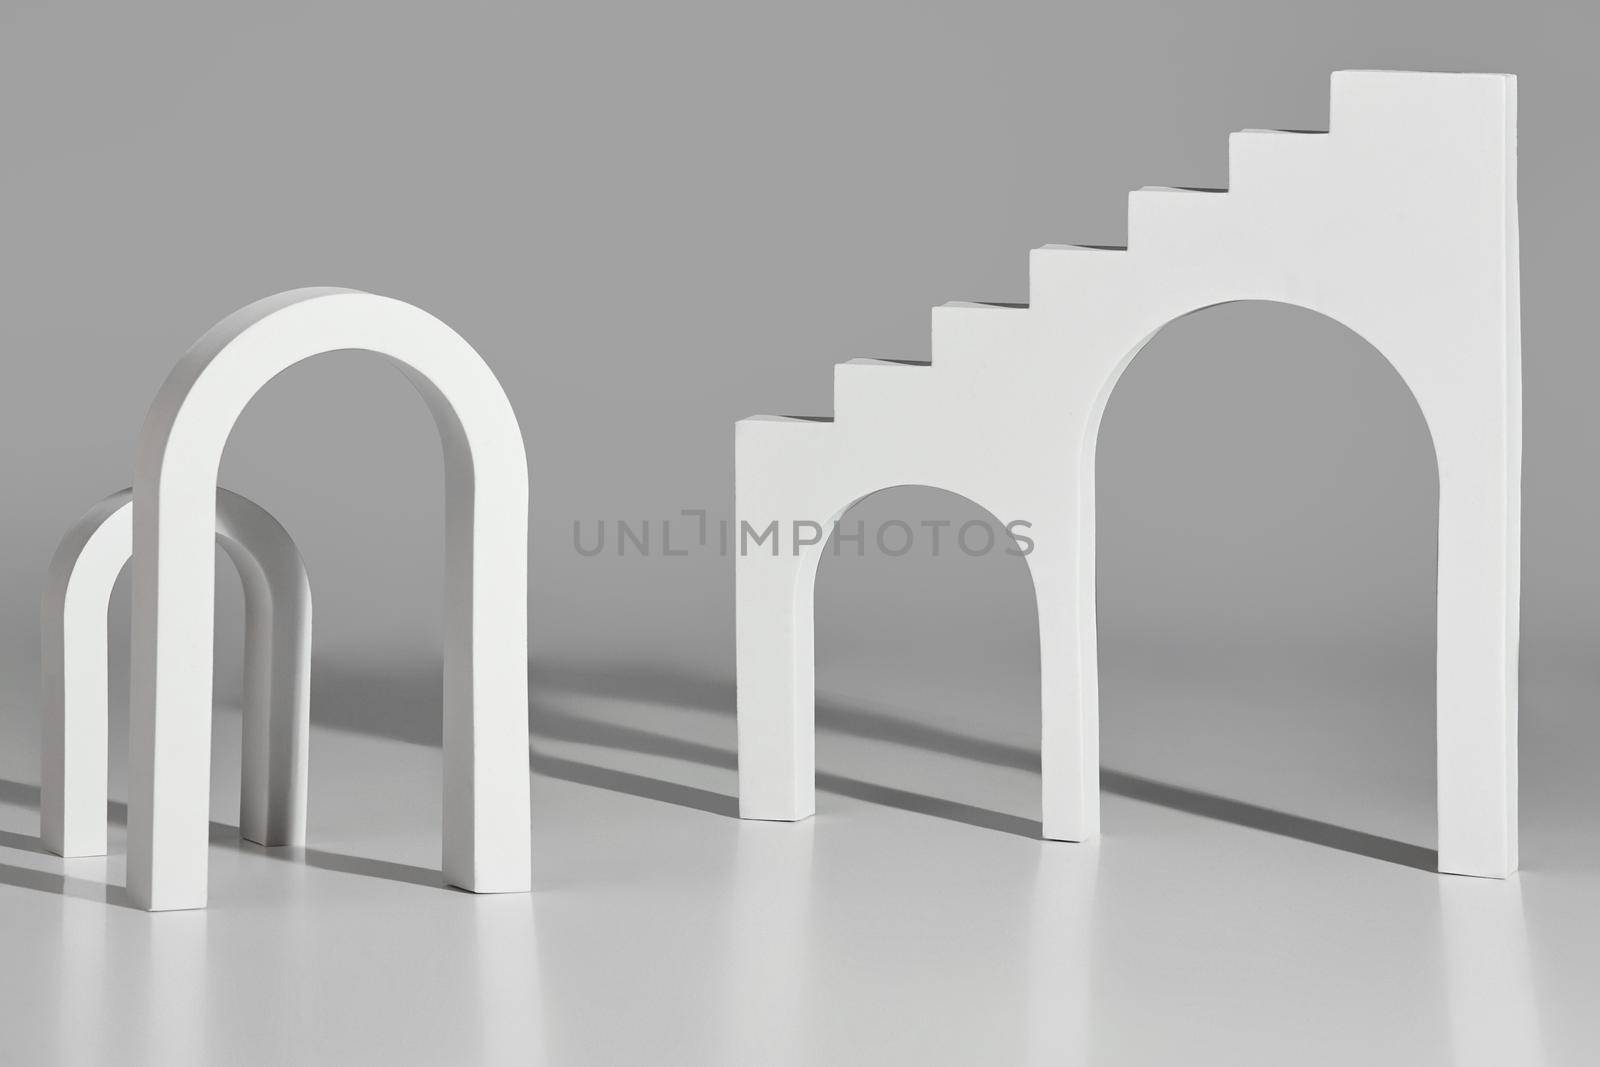 Monochrome illustration with simple architectural elements. White arches of different sizes and stairs with arched openings on light gray background. 3D rendering